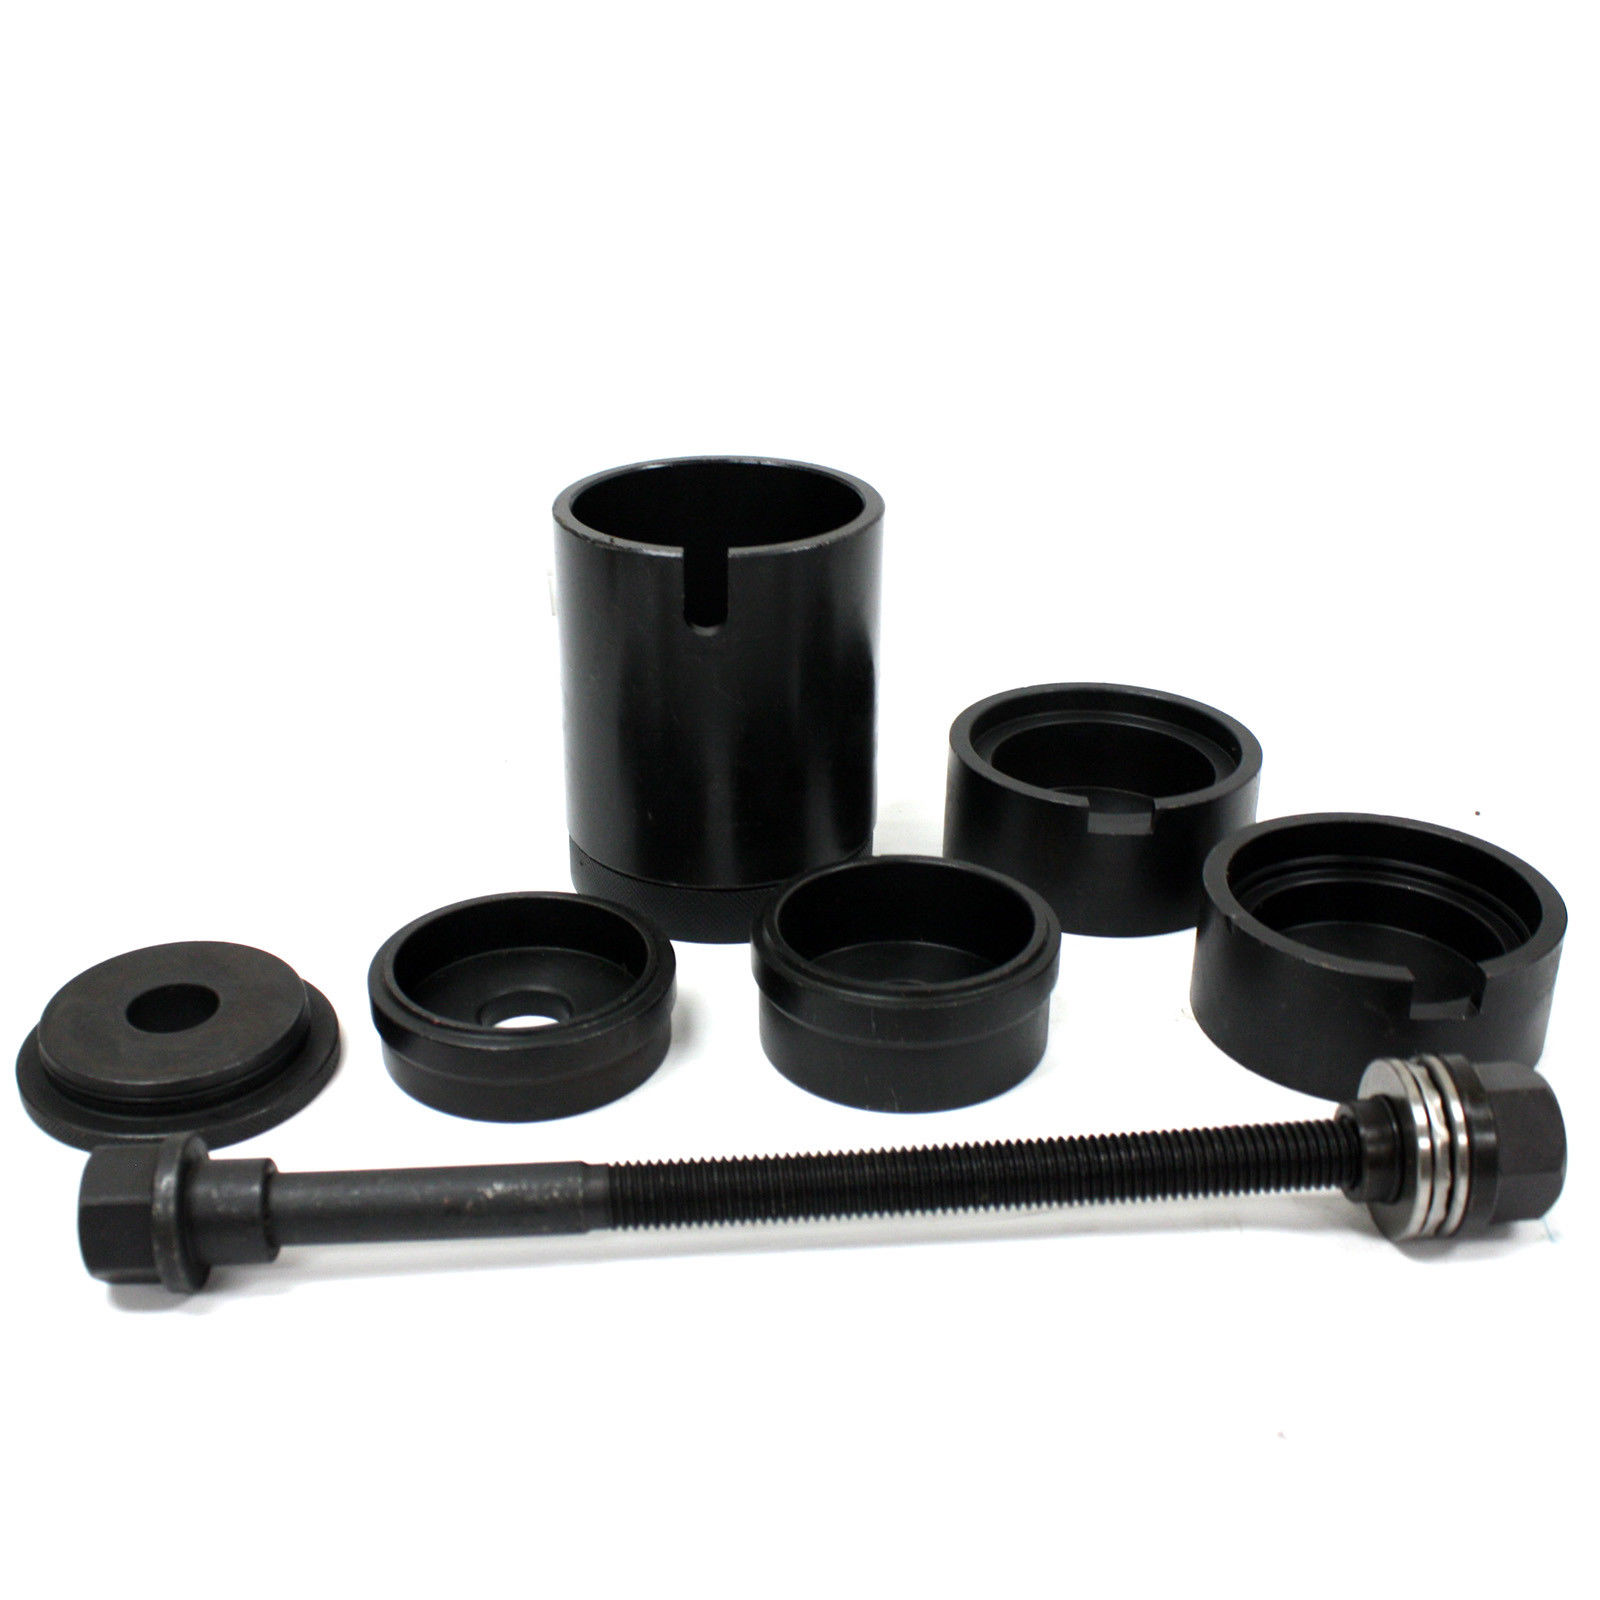 Festnight Bushing Tools Kit Subframe Bushing Installation and Remove Tool Set for Benz W220&W211&W203 